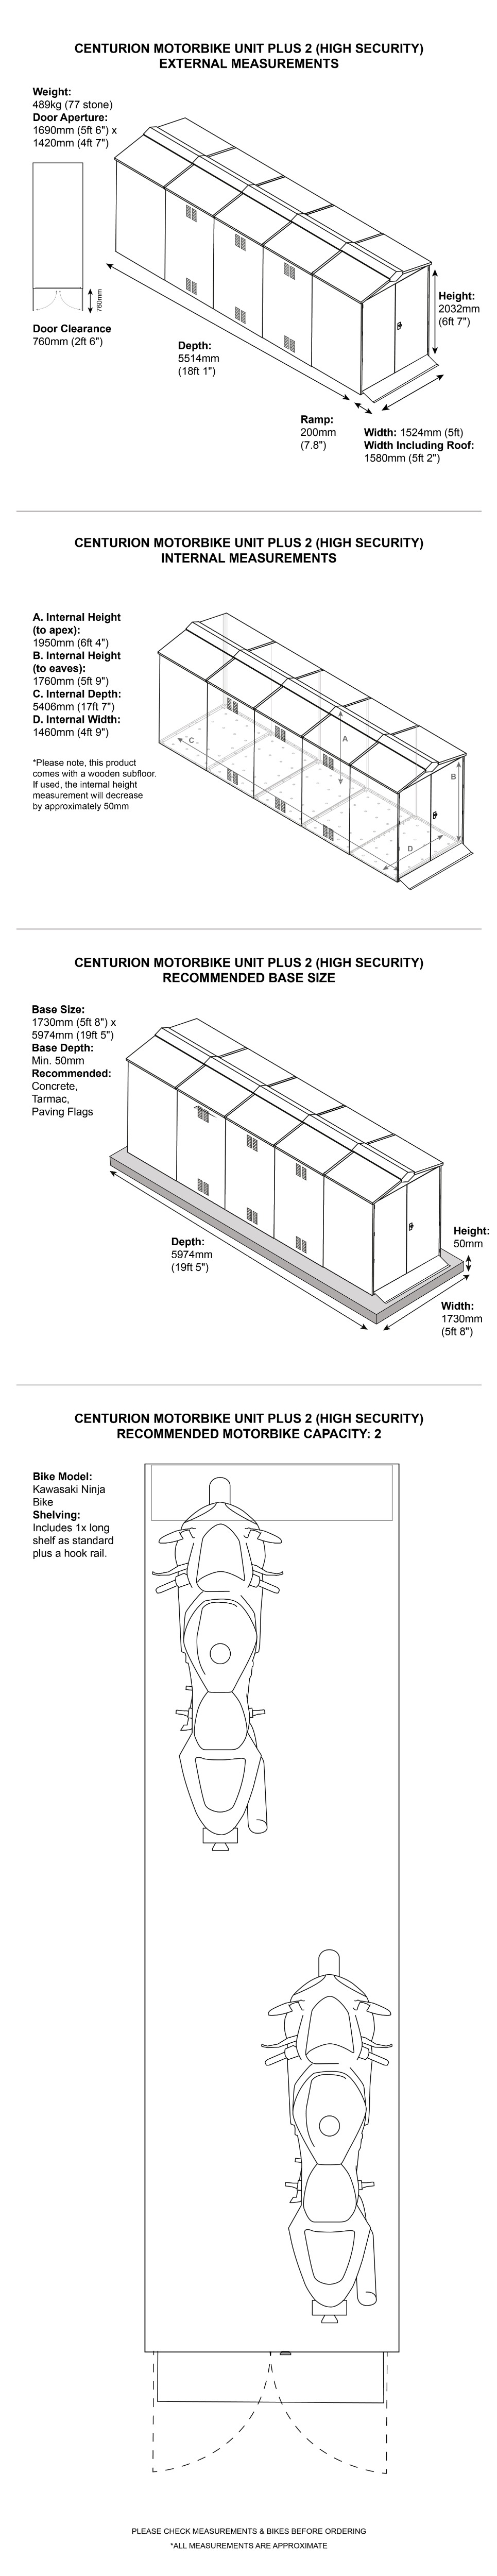 Centurion Plus 2 Metal Motorcycle Shed Dimensions